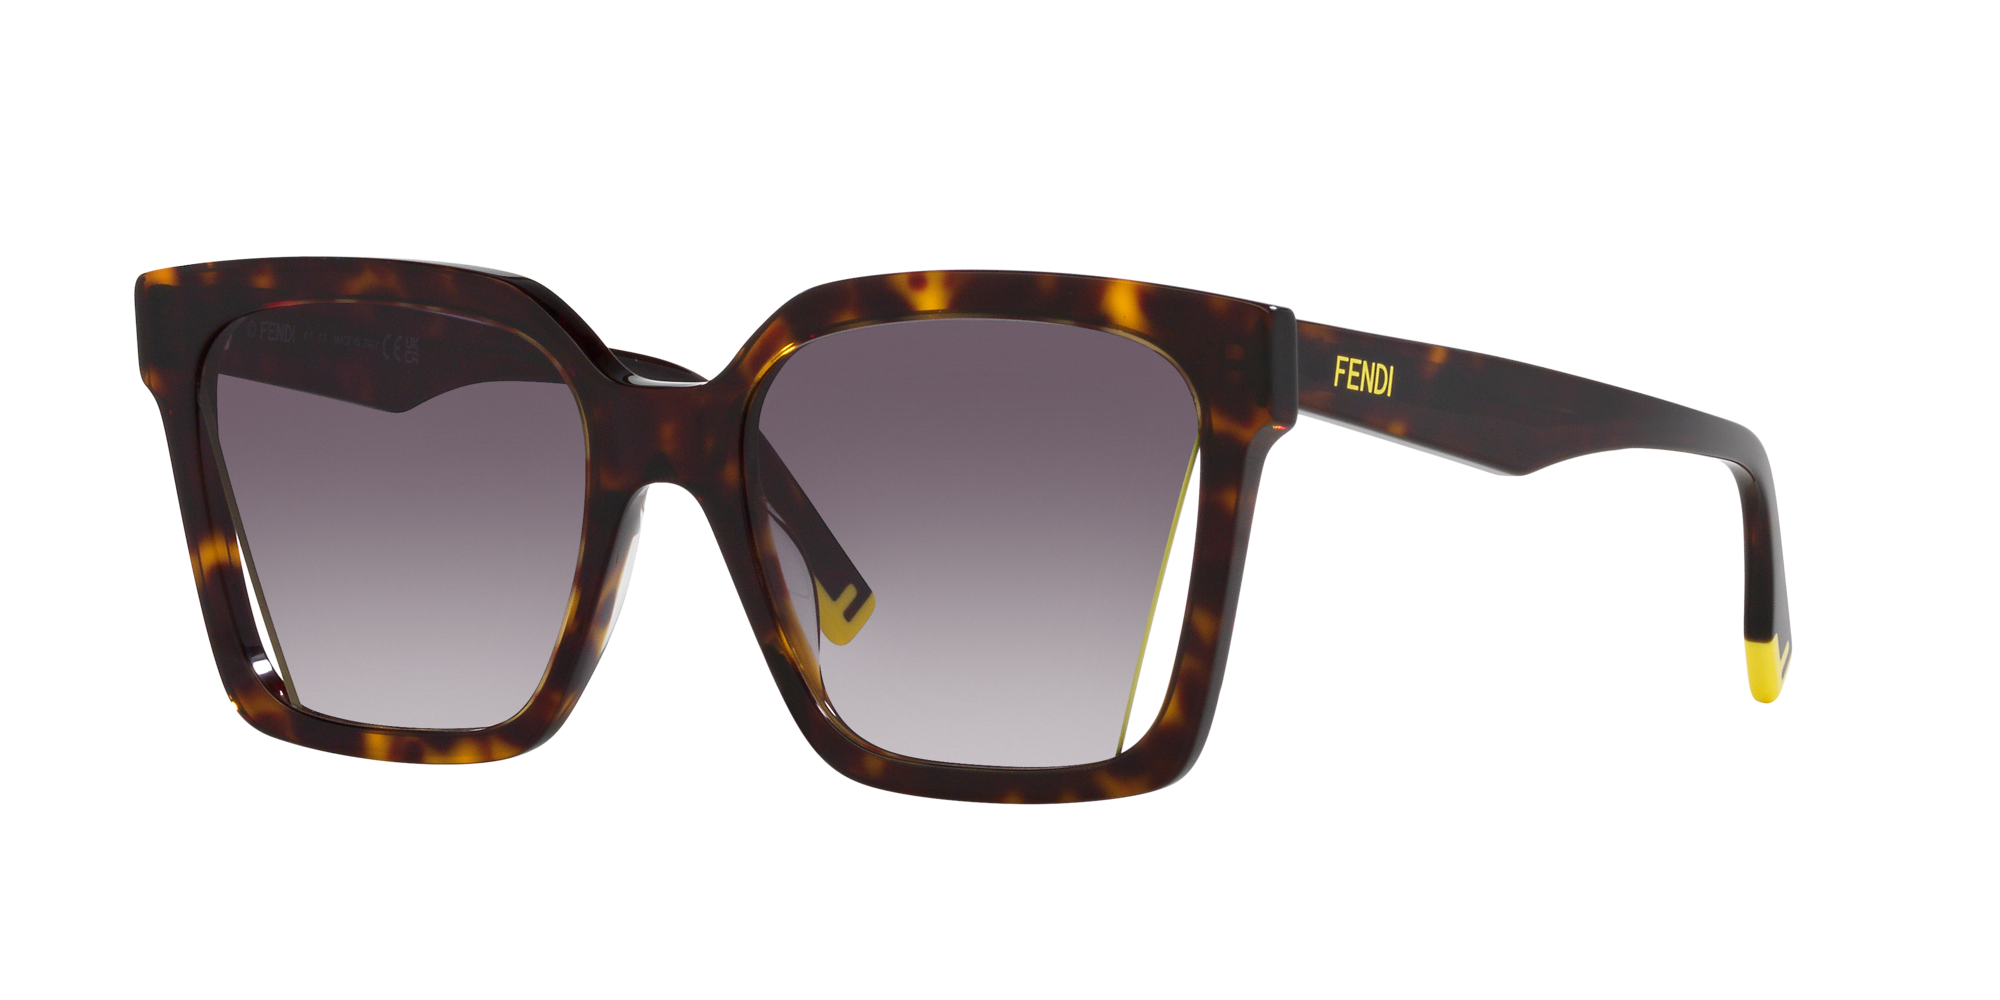 Sunglass Hut - Funky and chunky in all the right places, these colorful  Prada shades will catch admiring eyes. Discover more:  https://bit.ly/SGH_Trend-Boho 🔥 | Facebook